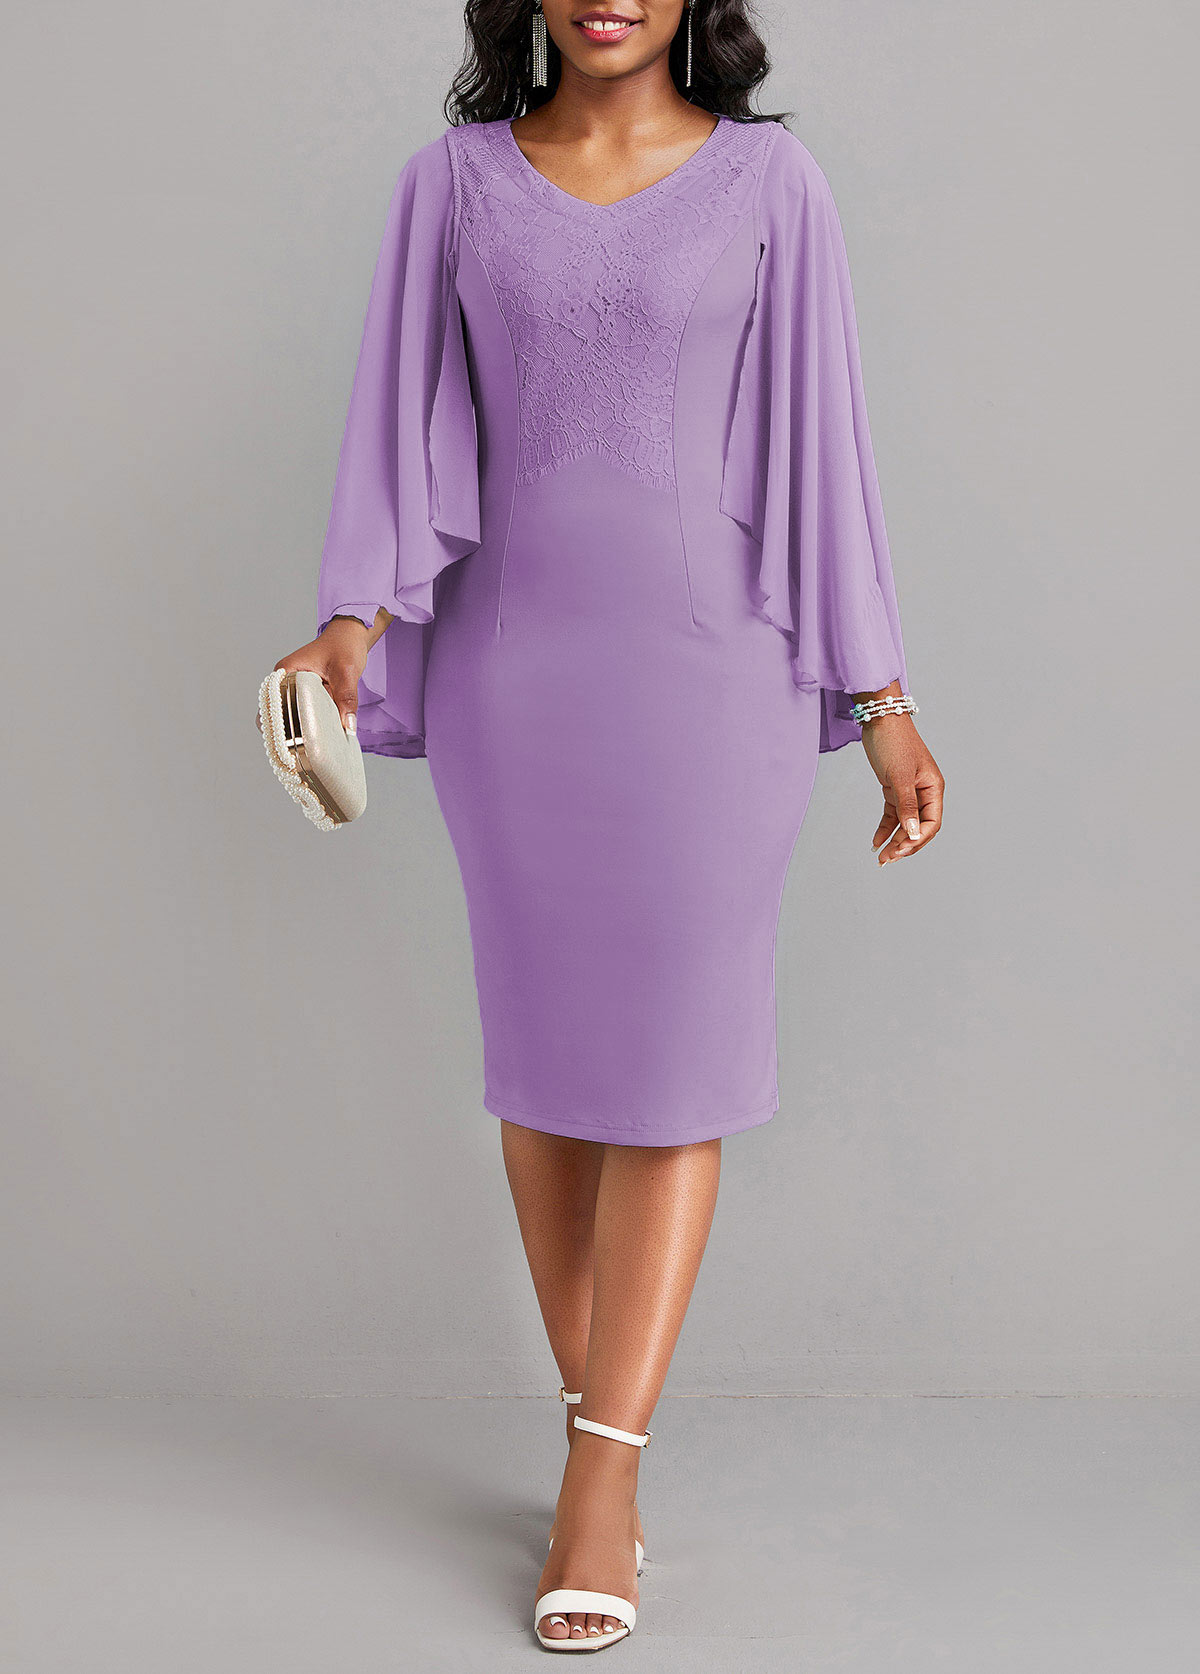 Neon Violet Patchwork Long Sleeve Bodycon Dress